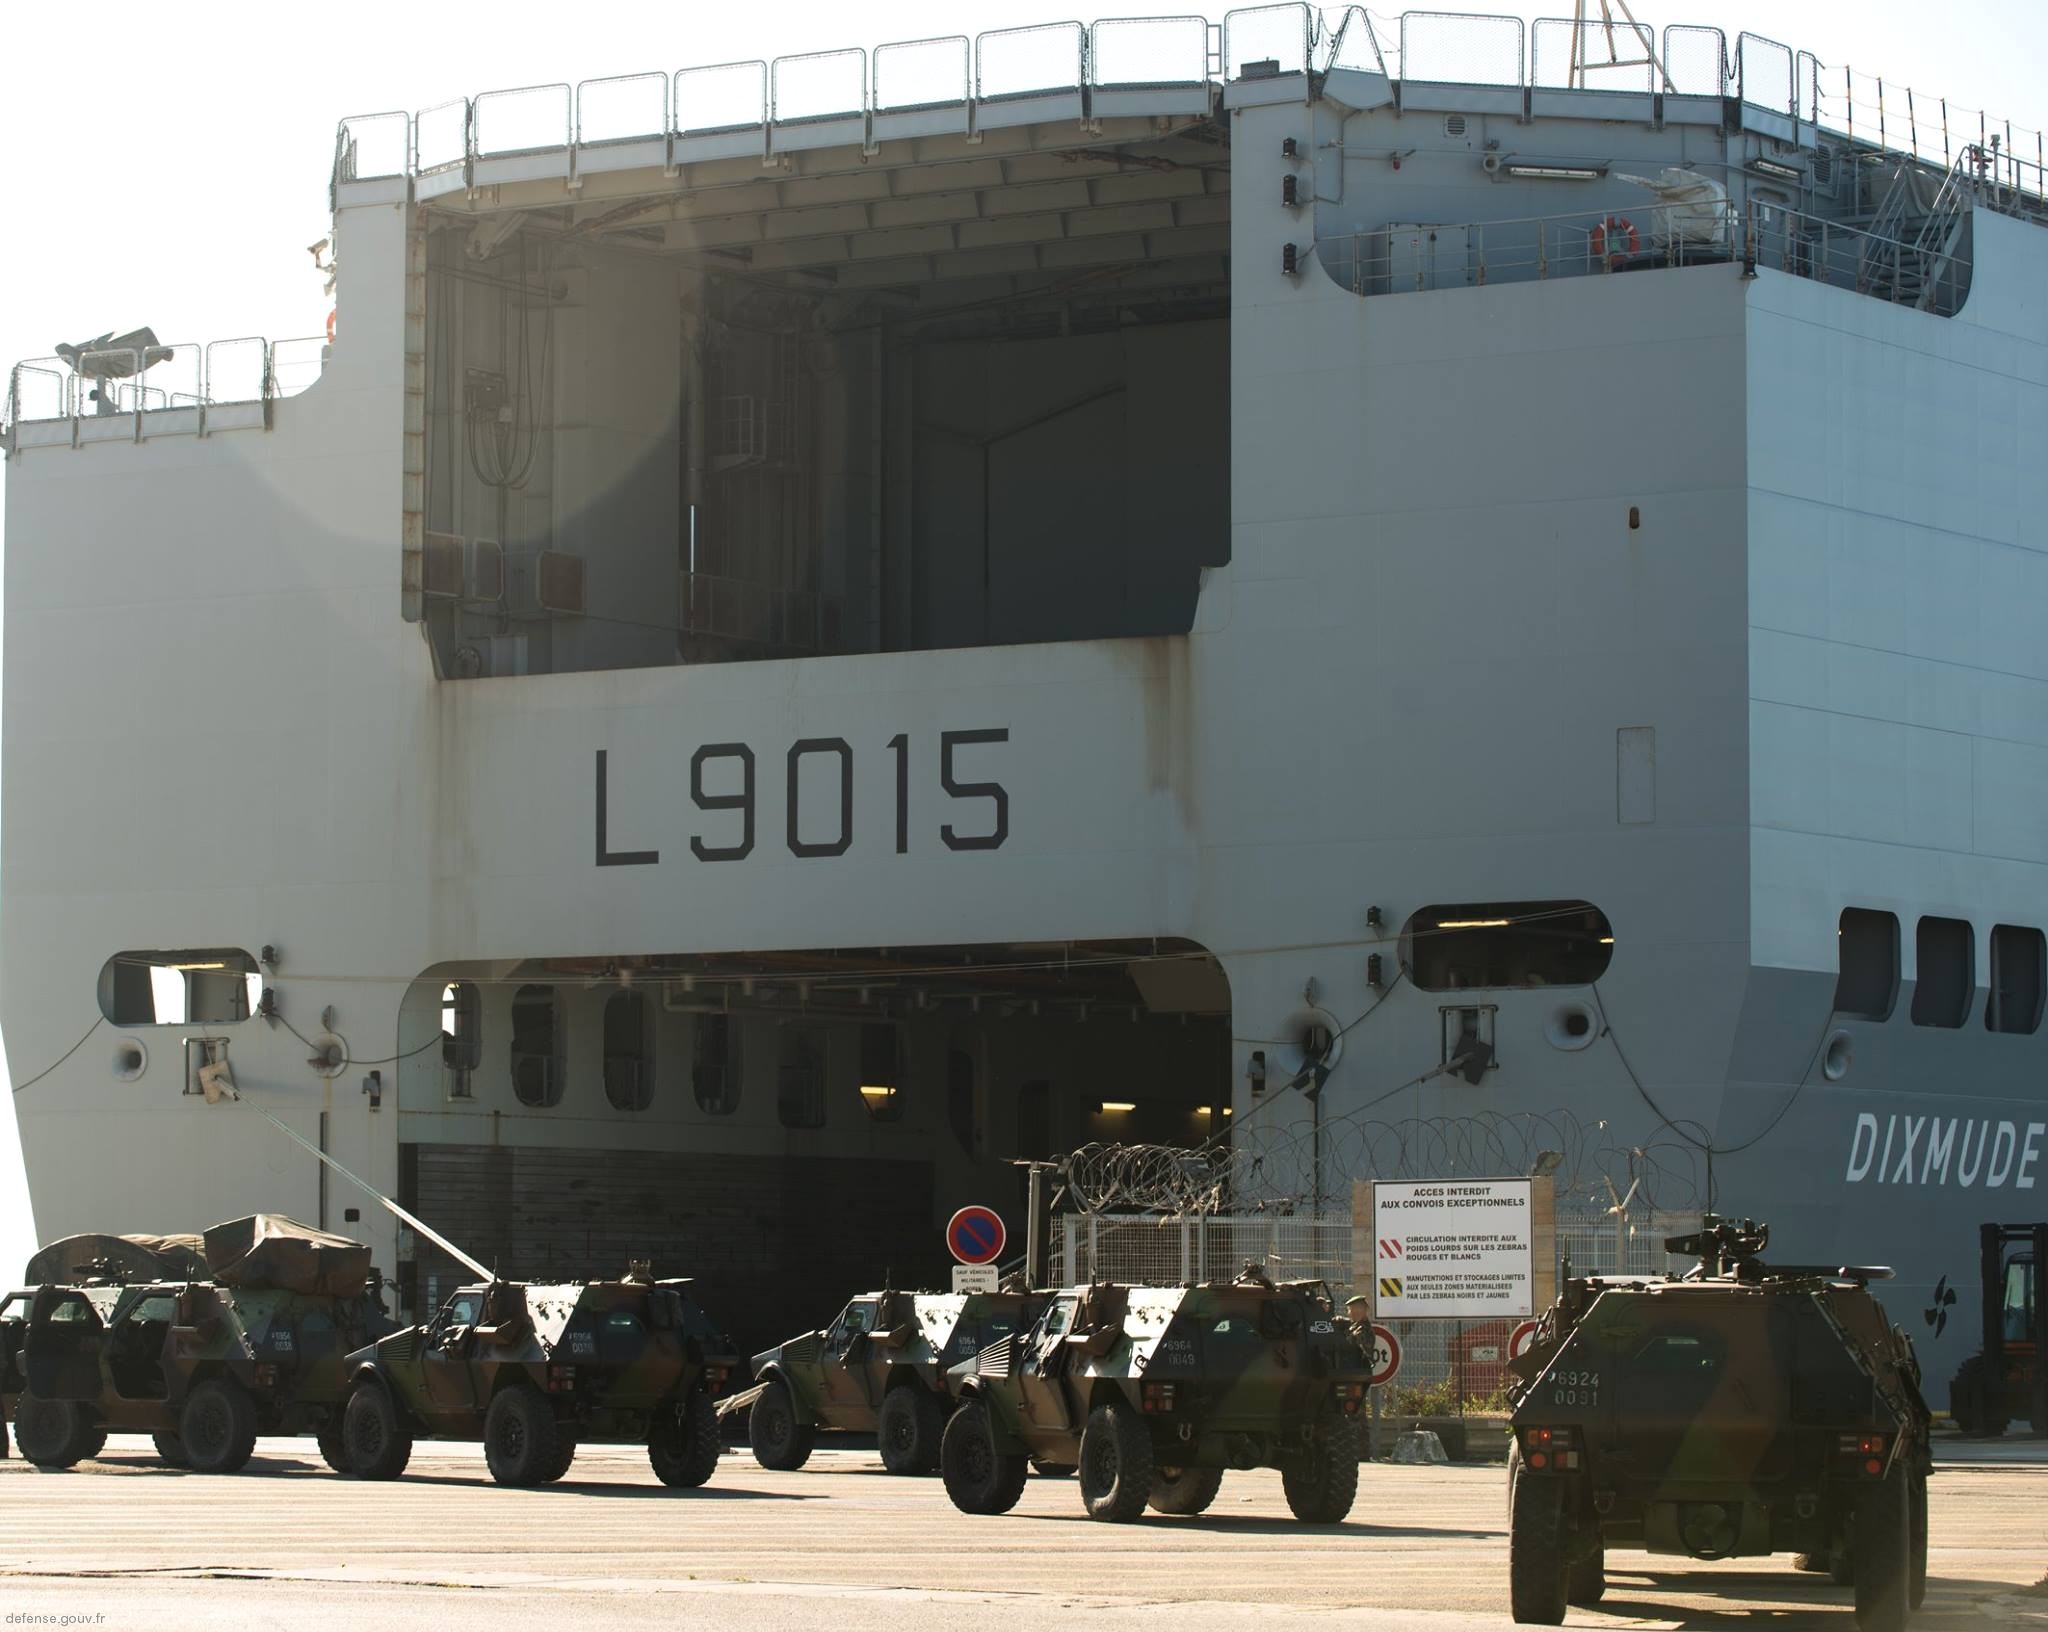 l-9015 fs dixmude mistral class amphibious assault command ship bpc french navy marine nationale 47